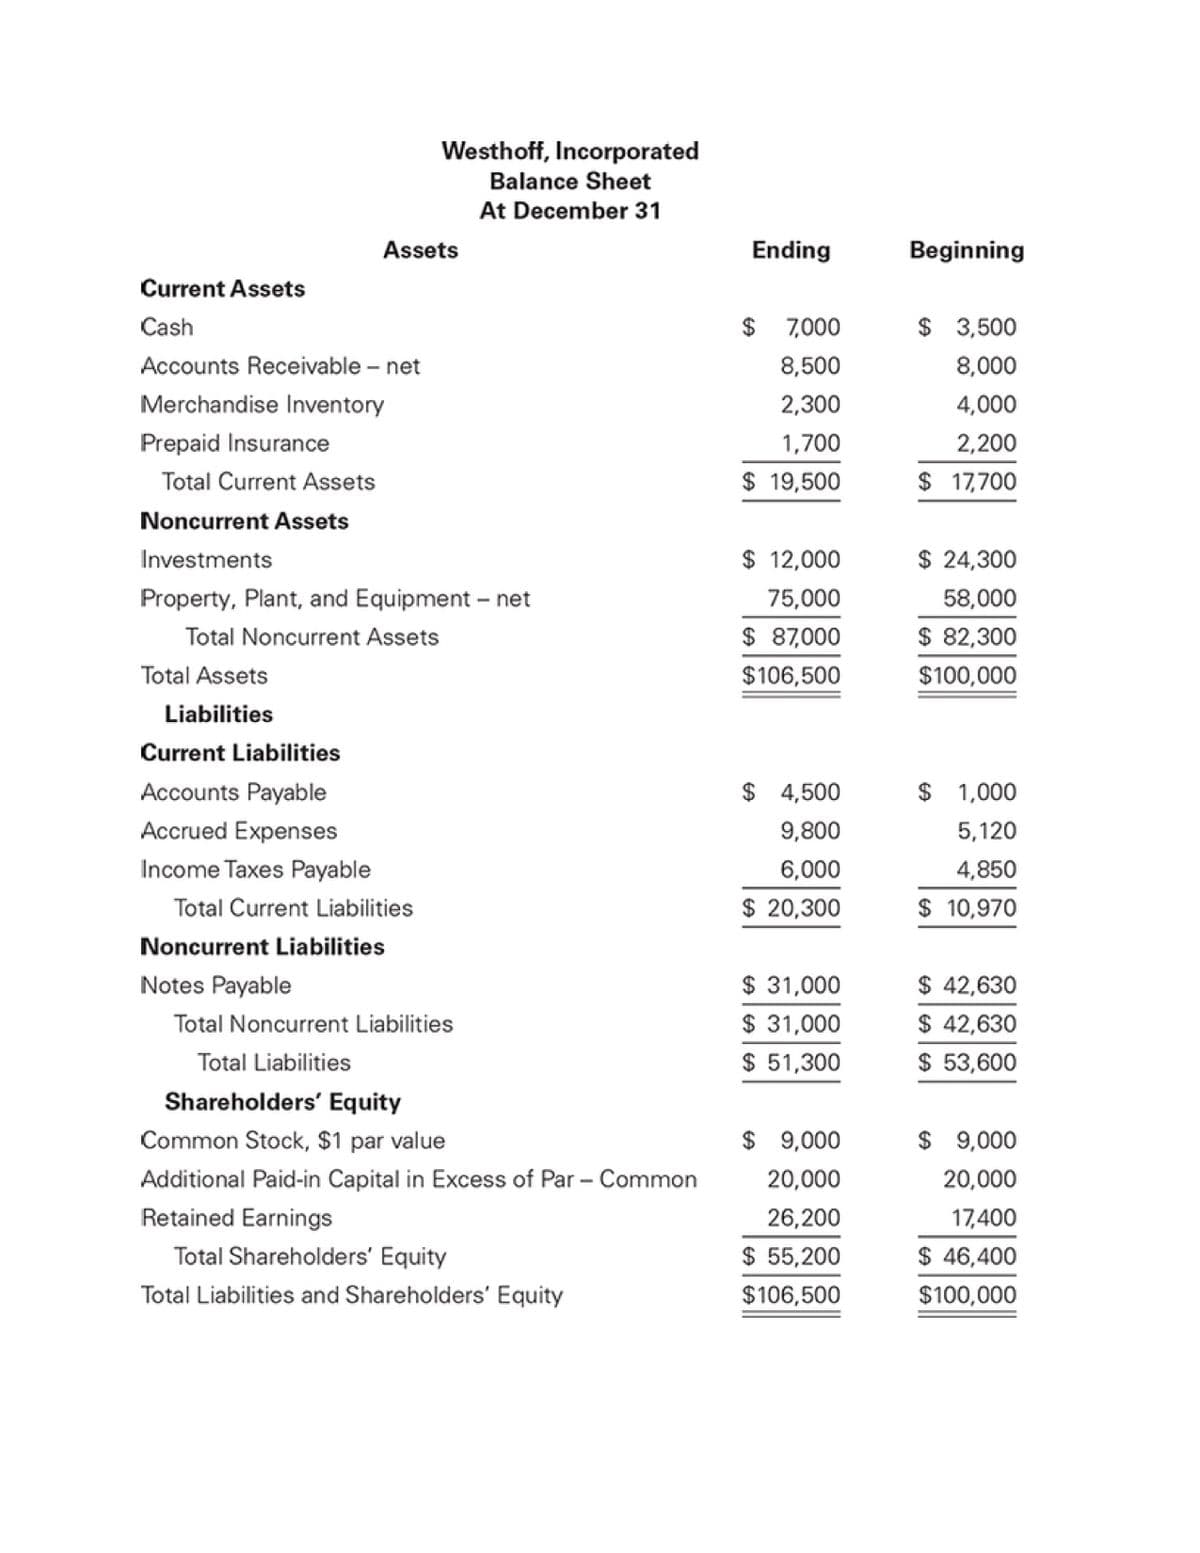 Westhoff, Incorporated
Balance Sheet
At December 31
Assets
Current Assets
Cash
Ending
Beginning
$
7,000
$ 3,500
Accounts Receivable - net
8,500
8,000
Merchandise Inventory
2,300
4,000
Prepaid Insurance
1,700
2,200
Total Current Assets
$ 19,500
$ 17,700
Noncurrent Assets
Investments
$ 12,000
$ 24,300
Property, Plant, and Equipment - net
75,000
Total Noncurrent Assets
$ 87,000
Total Assets
$106,500
58,000
$ 82,300
$100,000
Liabilities
Current Liabilities
Accounts Payable
$ 4,500
$ 1,000
Accrued Expenses
Income Taxes Payable
Total Current Liabilities
9,800
6,000
5,120
4,850
$ 20,300
$ 10,970
Noncurrent Liabilities
Notes Payable
$ 31,000
$ 42,630
Total Noncurrent Liabilities
$ 31,000
$ 42,630
Total Liabilities
$ 51,300
$ 53,600
Shareholders' Equity
Common Stock, $1 par value
Additional Paid-in Capital in Excess of Par - Common
Retained Earnings
Total Shareholders' Equity
Total Liabilities and Shareholders' Equity
$ 9,000
$ 9,000
20,000
26,200
20,000
17,400
$ 55,200
$ 46,400
$106,500
$100,000